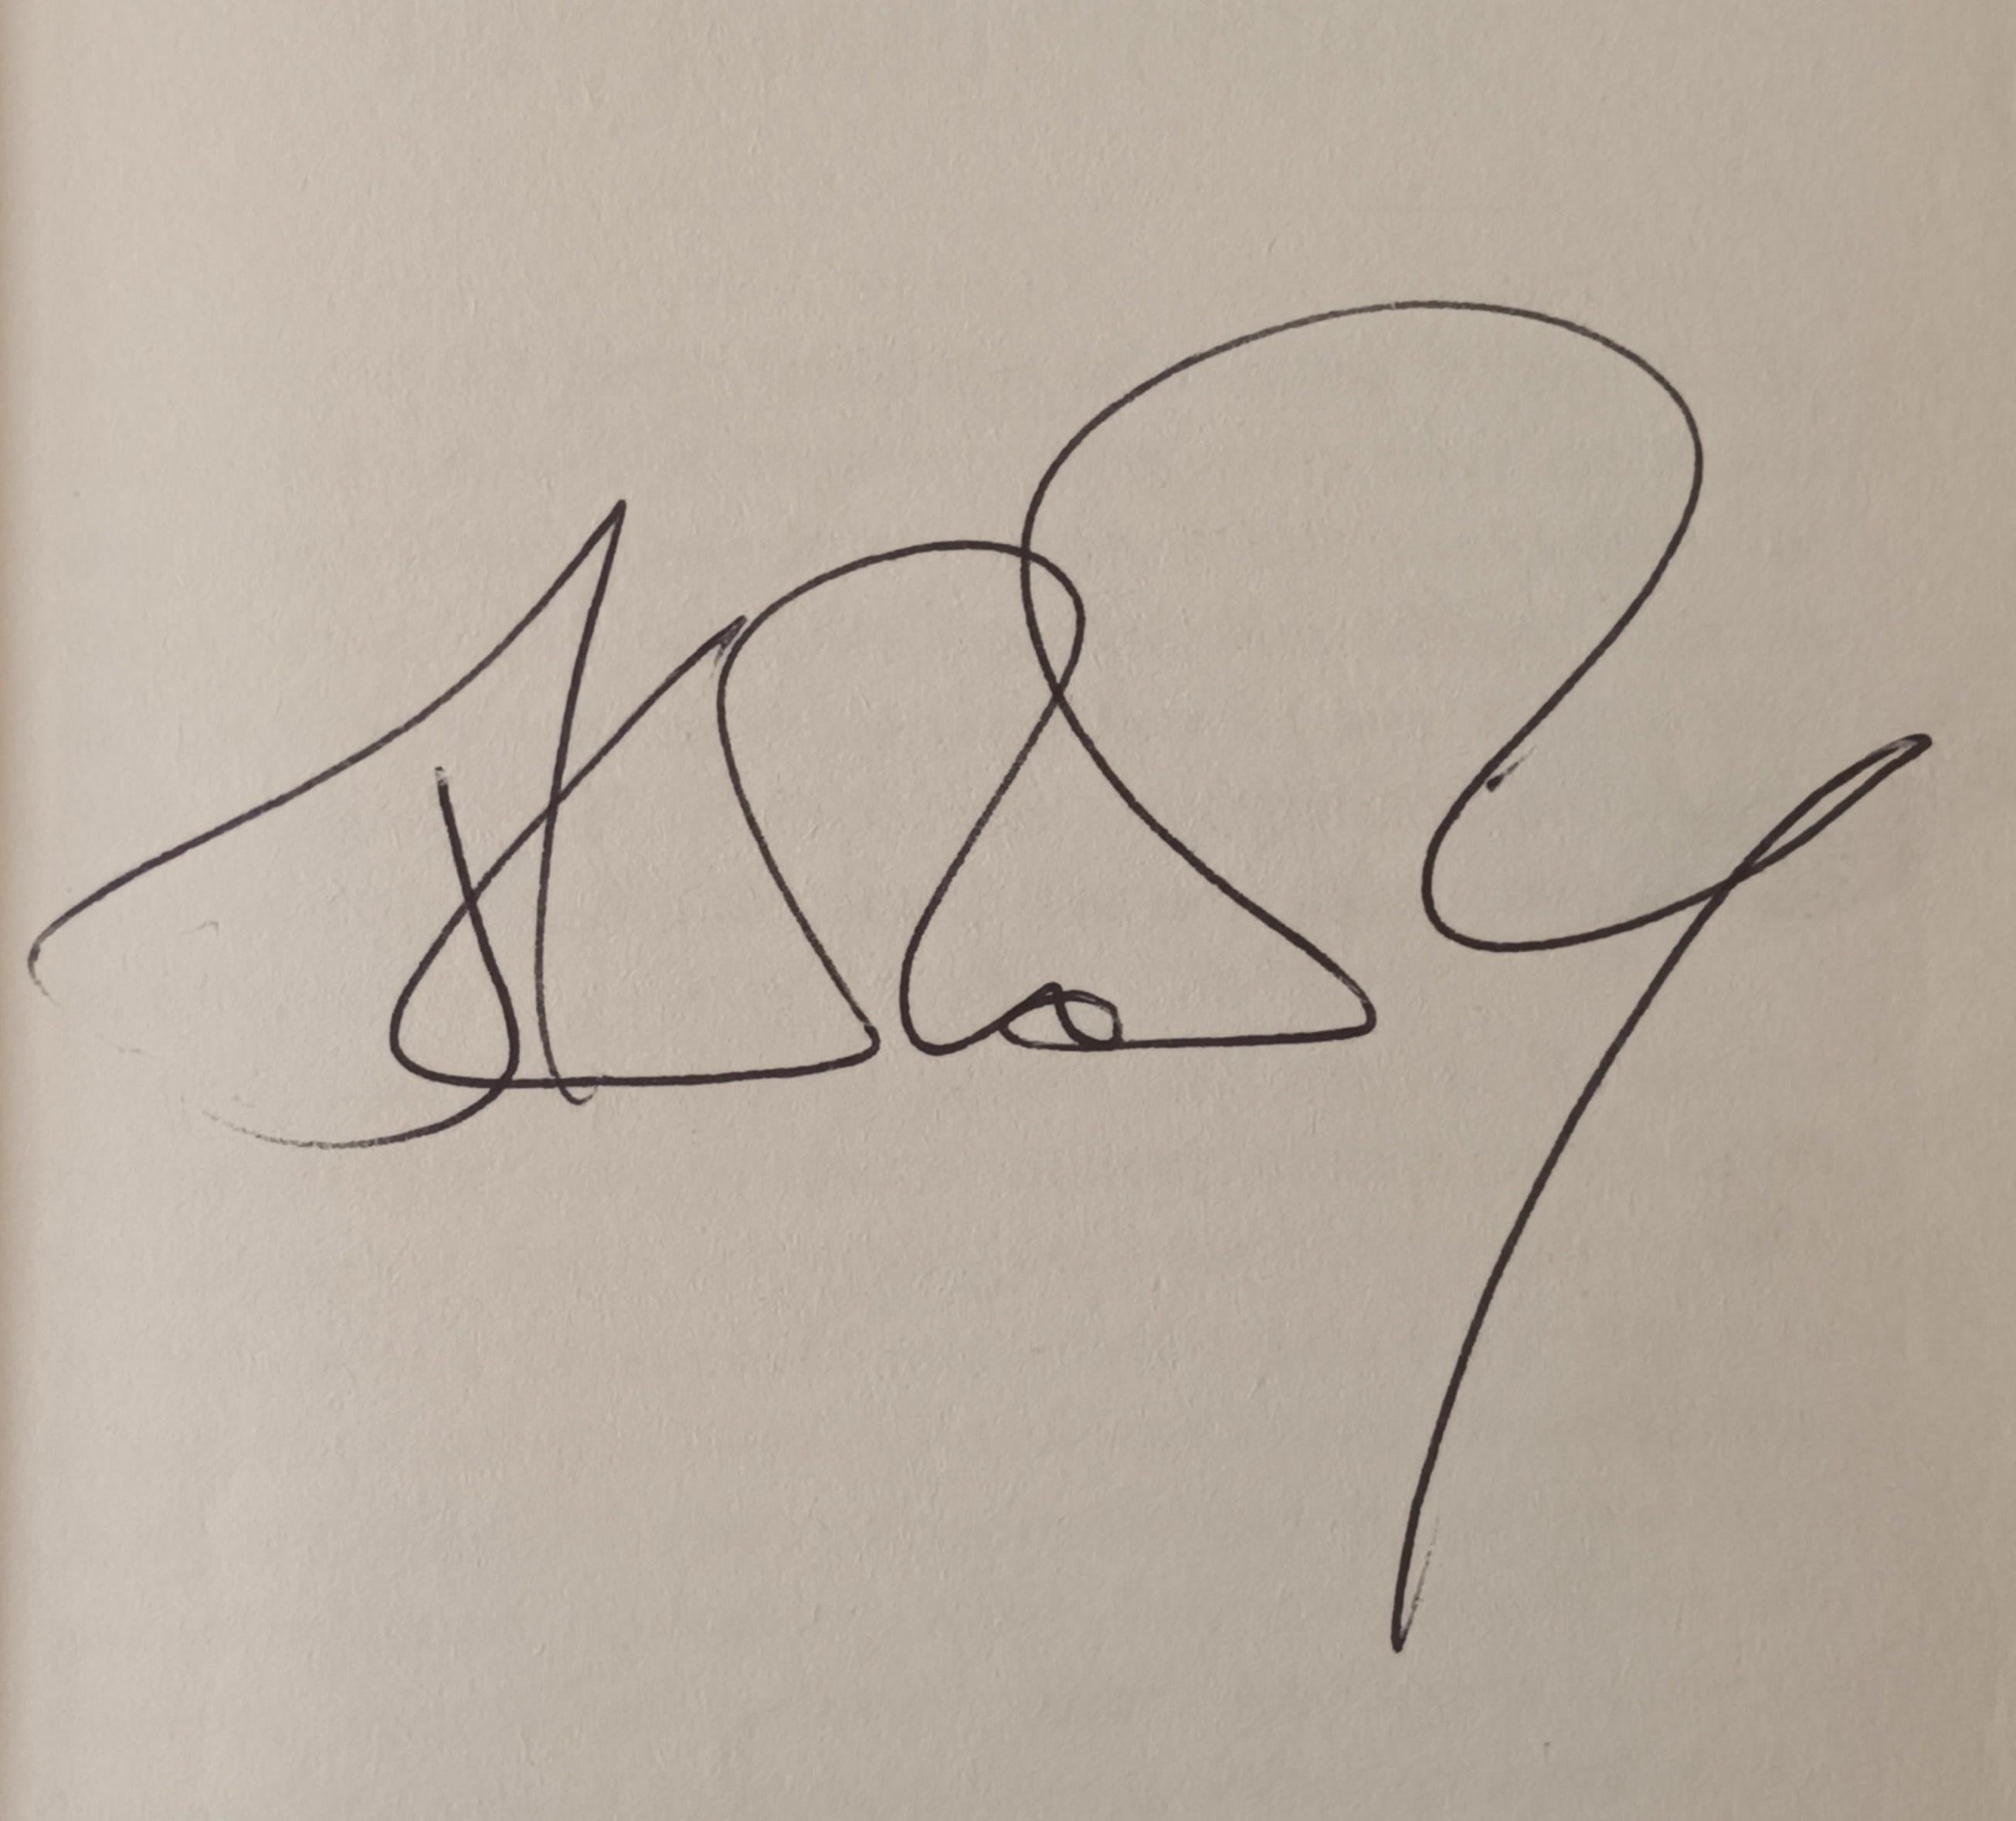 A JK Rowling signed first edition of Harry Potter and the Goblet of Fire
Rowling has signed the first edition, first printing hardback on the dedication page: 